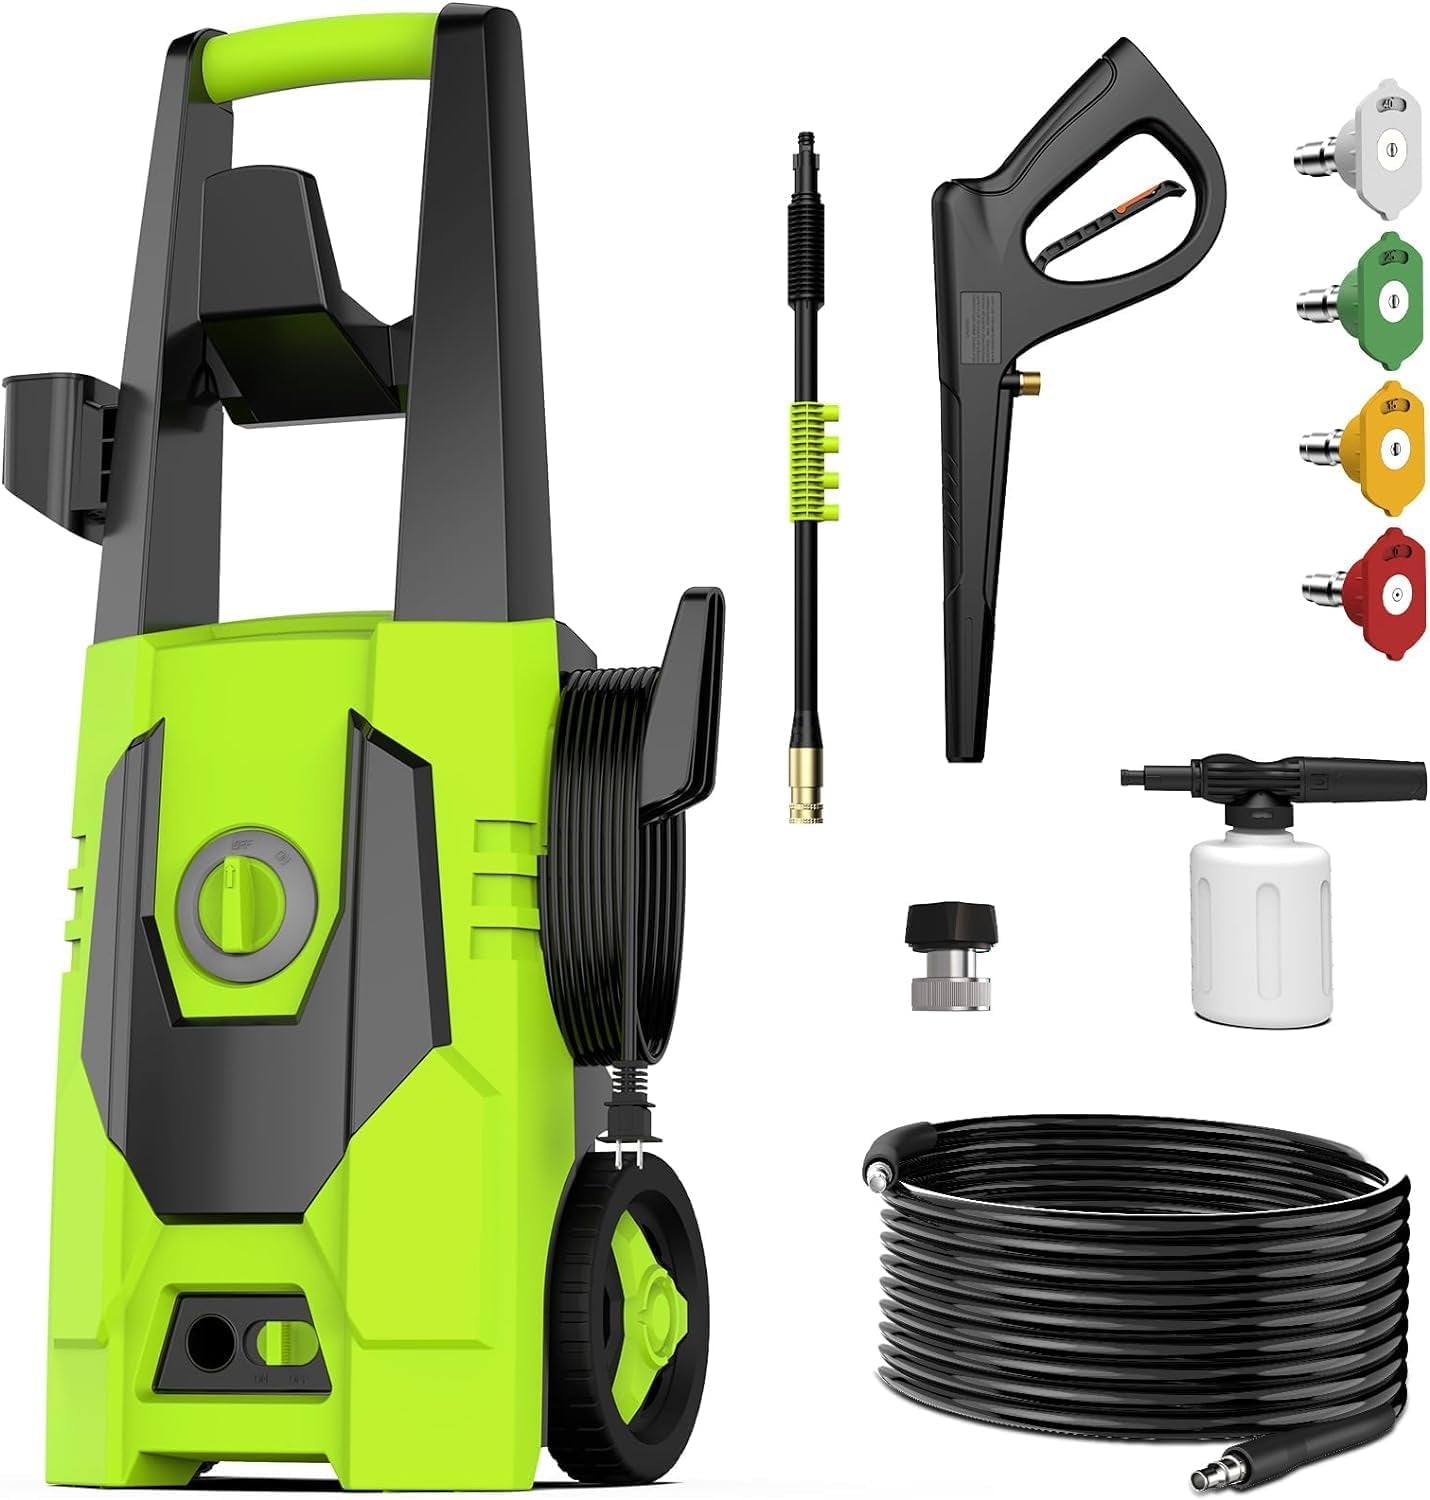 Electric Pressure Washer - 4500PSI Max 3.1 GPM Power Washer with 35FT Power Cord, 20FT Hose, Soap Tank, High Pressure Washer Electric Powerd Car Cleaning for Garden, Patios, Yard